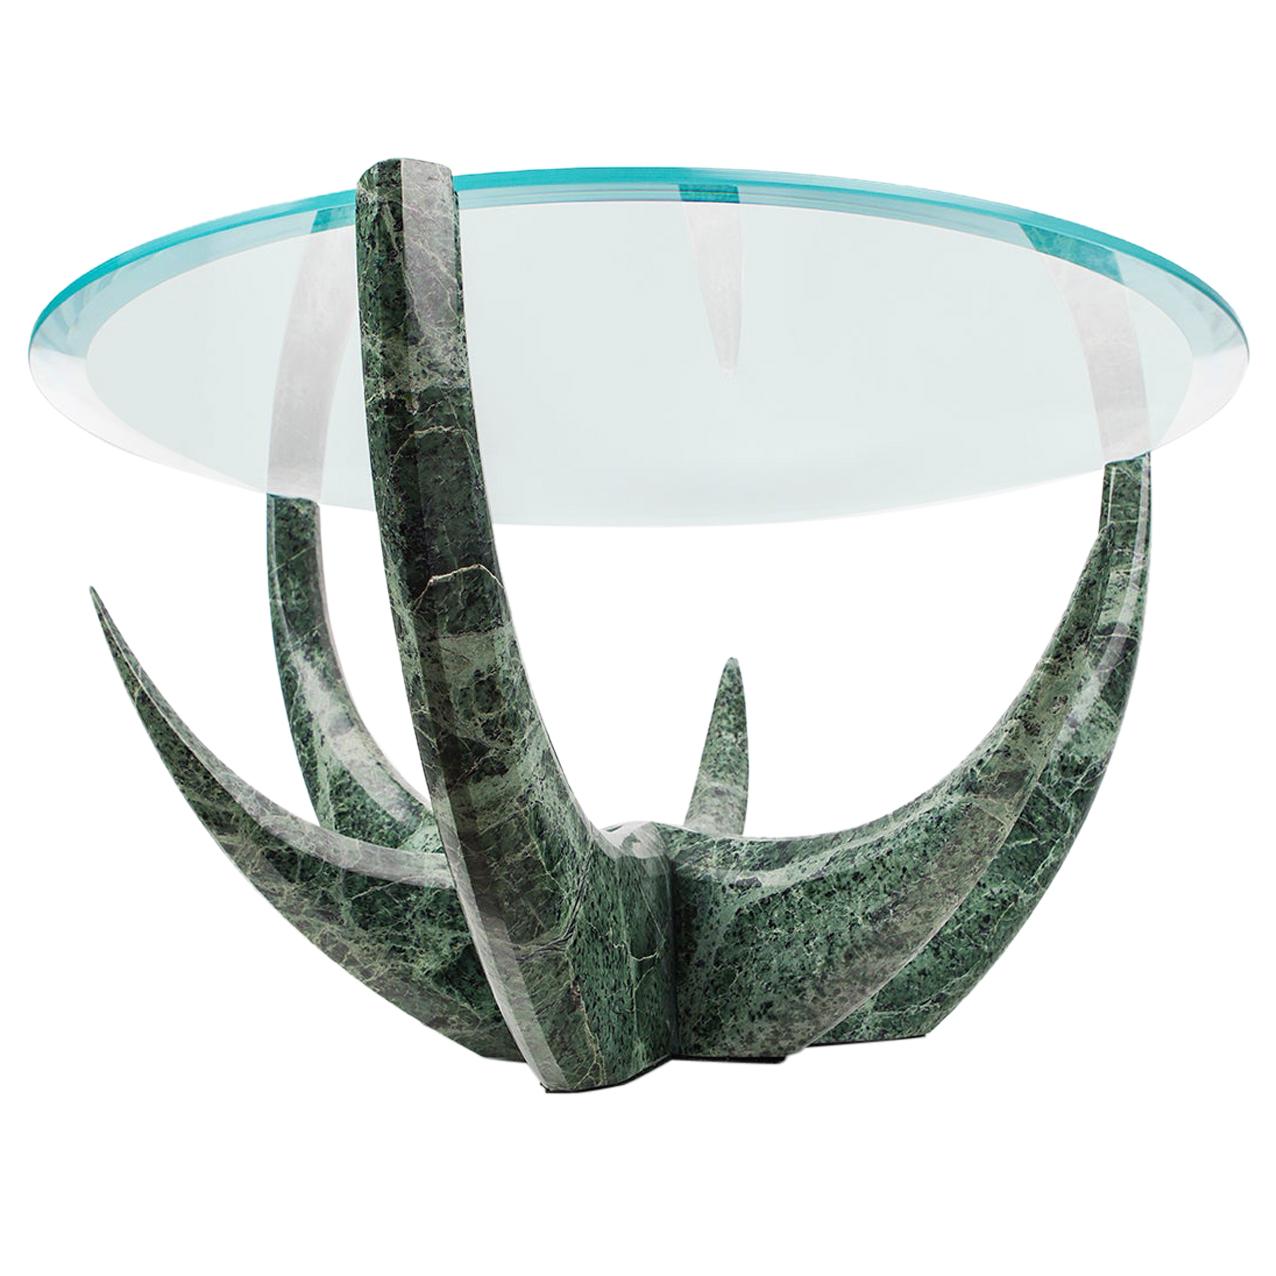 "The Diamond Aloe" Center Table ft. Green Marble and Glass